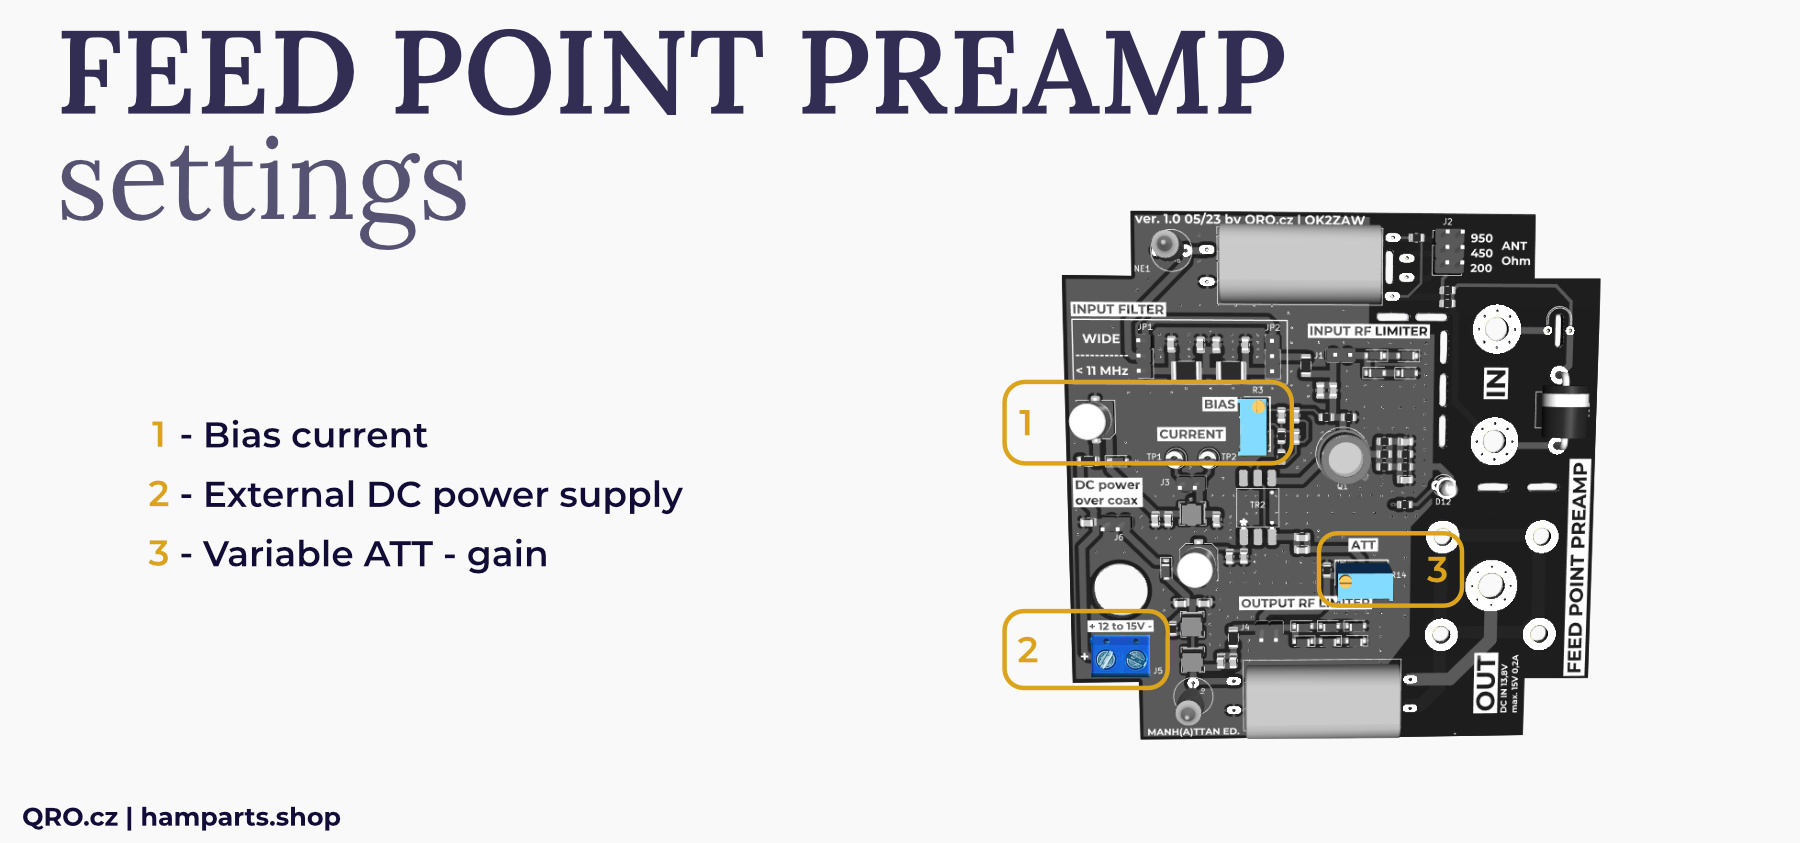 feed point preamp settings by qro.cz hamparts.shop